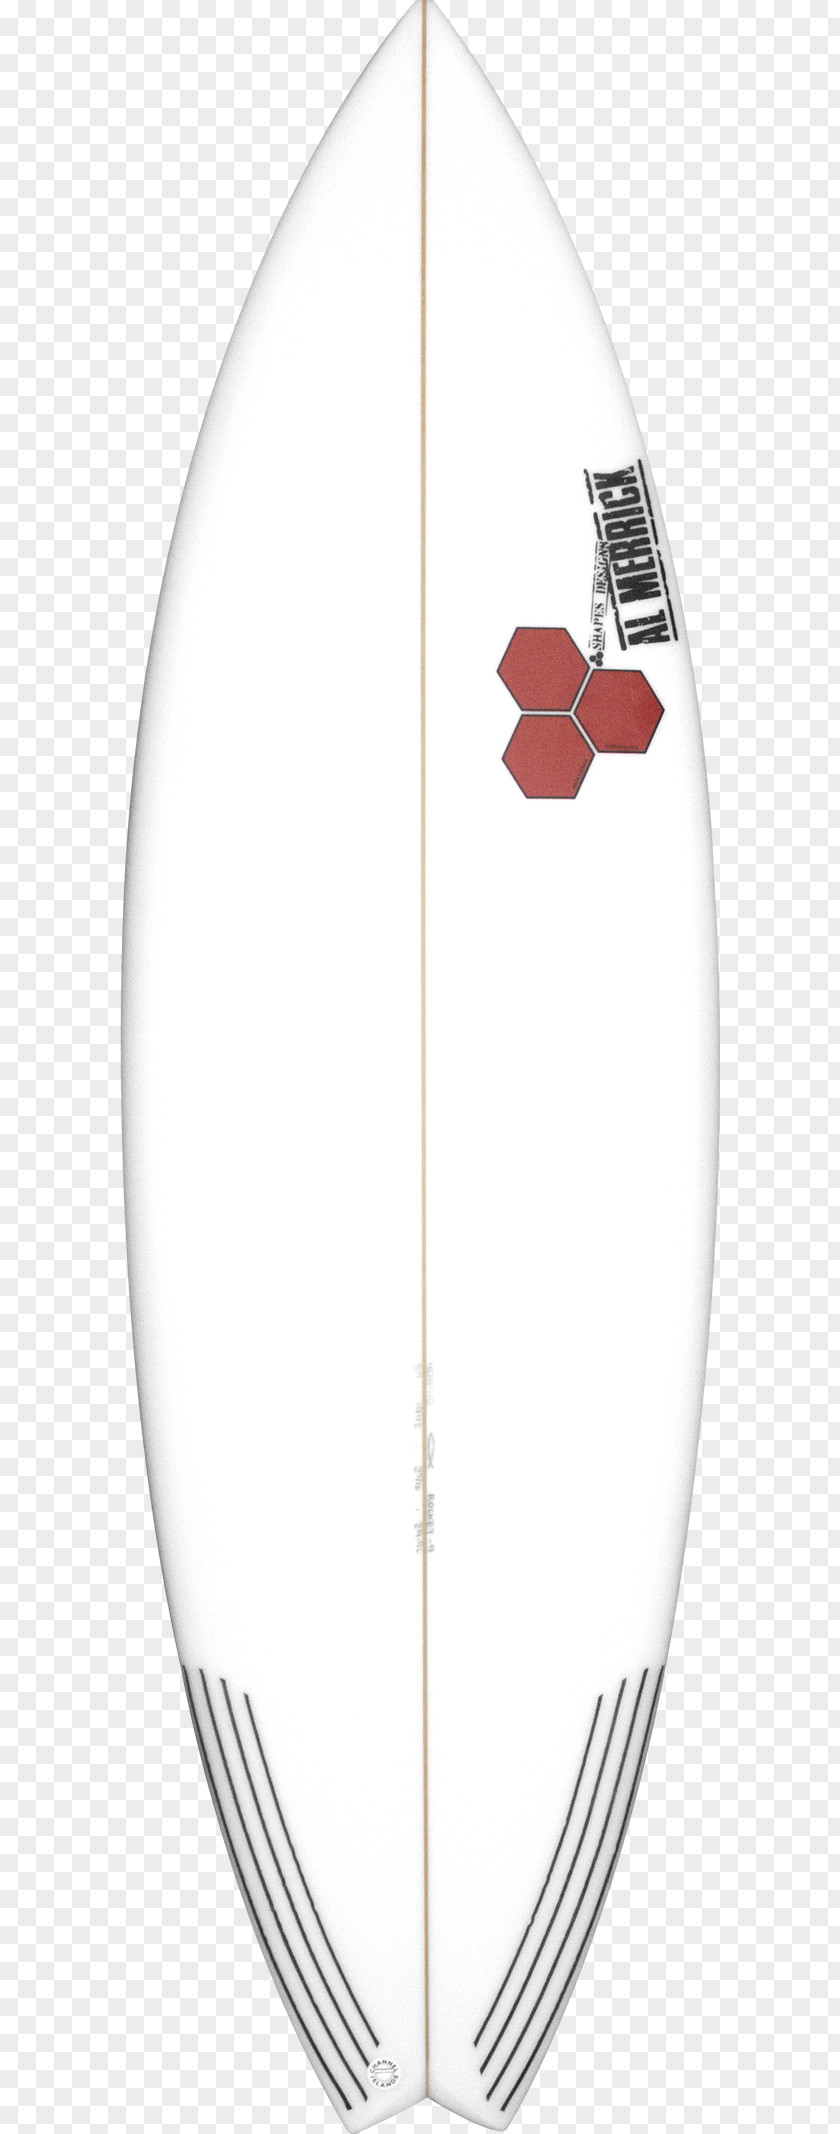 Surfboard Jasper Vos Scooters Surfing Go Fish IEEE 1394 PNG